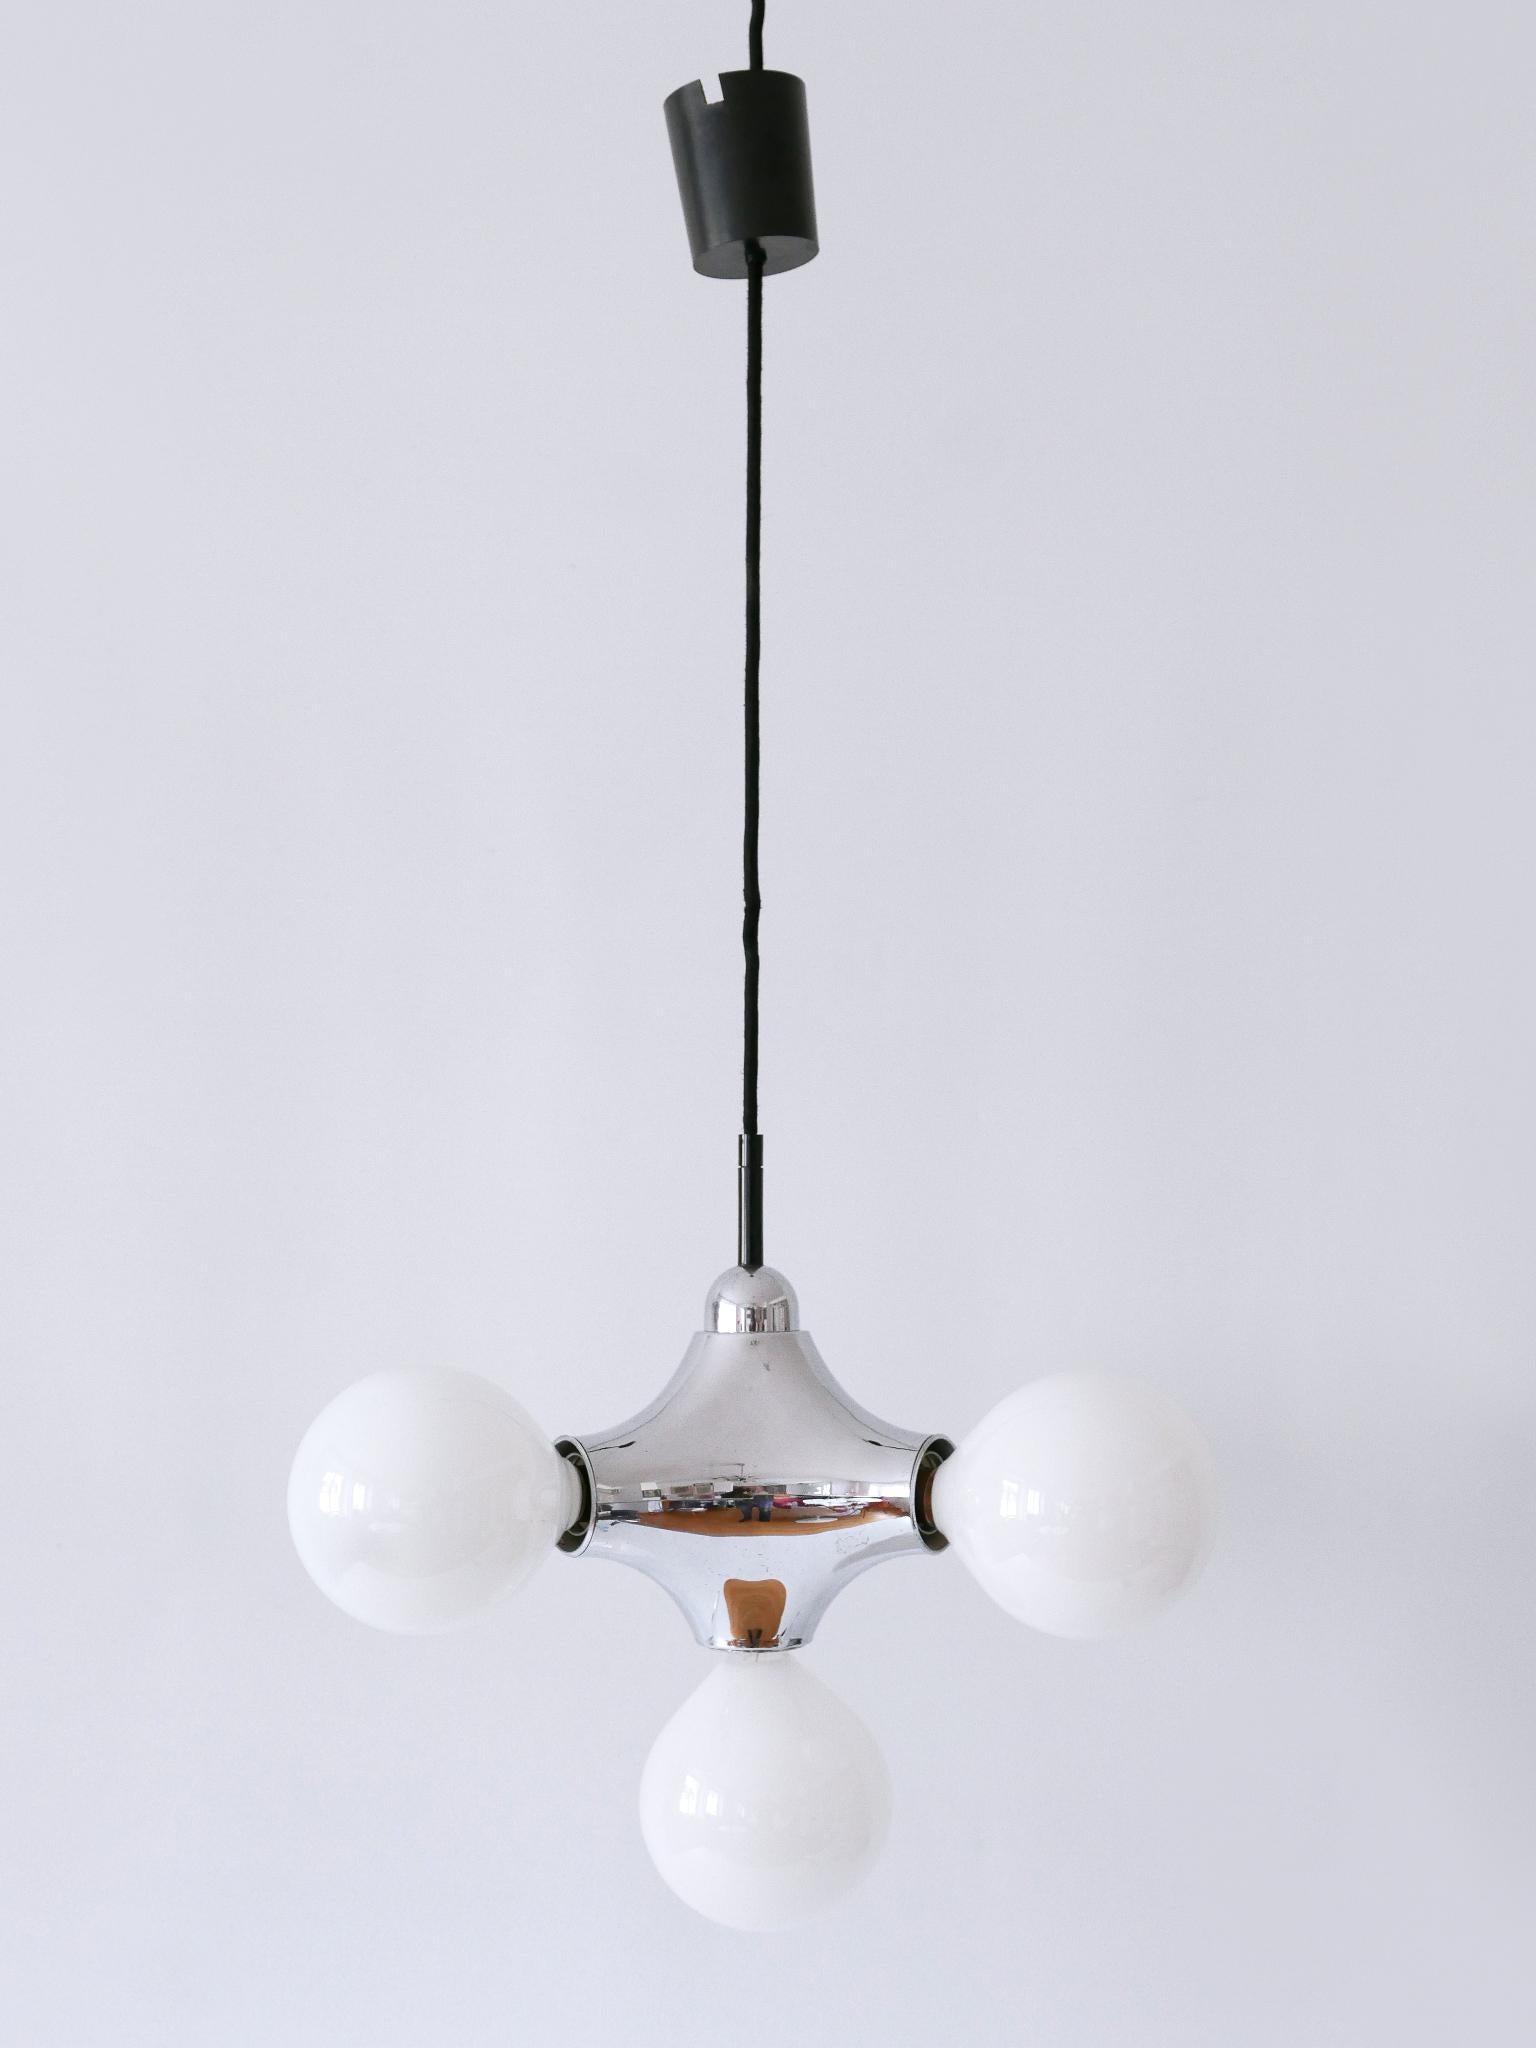 Rare Mid-Century Modern Atomic Pendant Lamp by Gebrüder Cosack Germany 1970s In Good Condition For Sale In Munich, DE